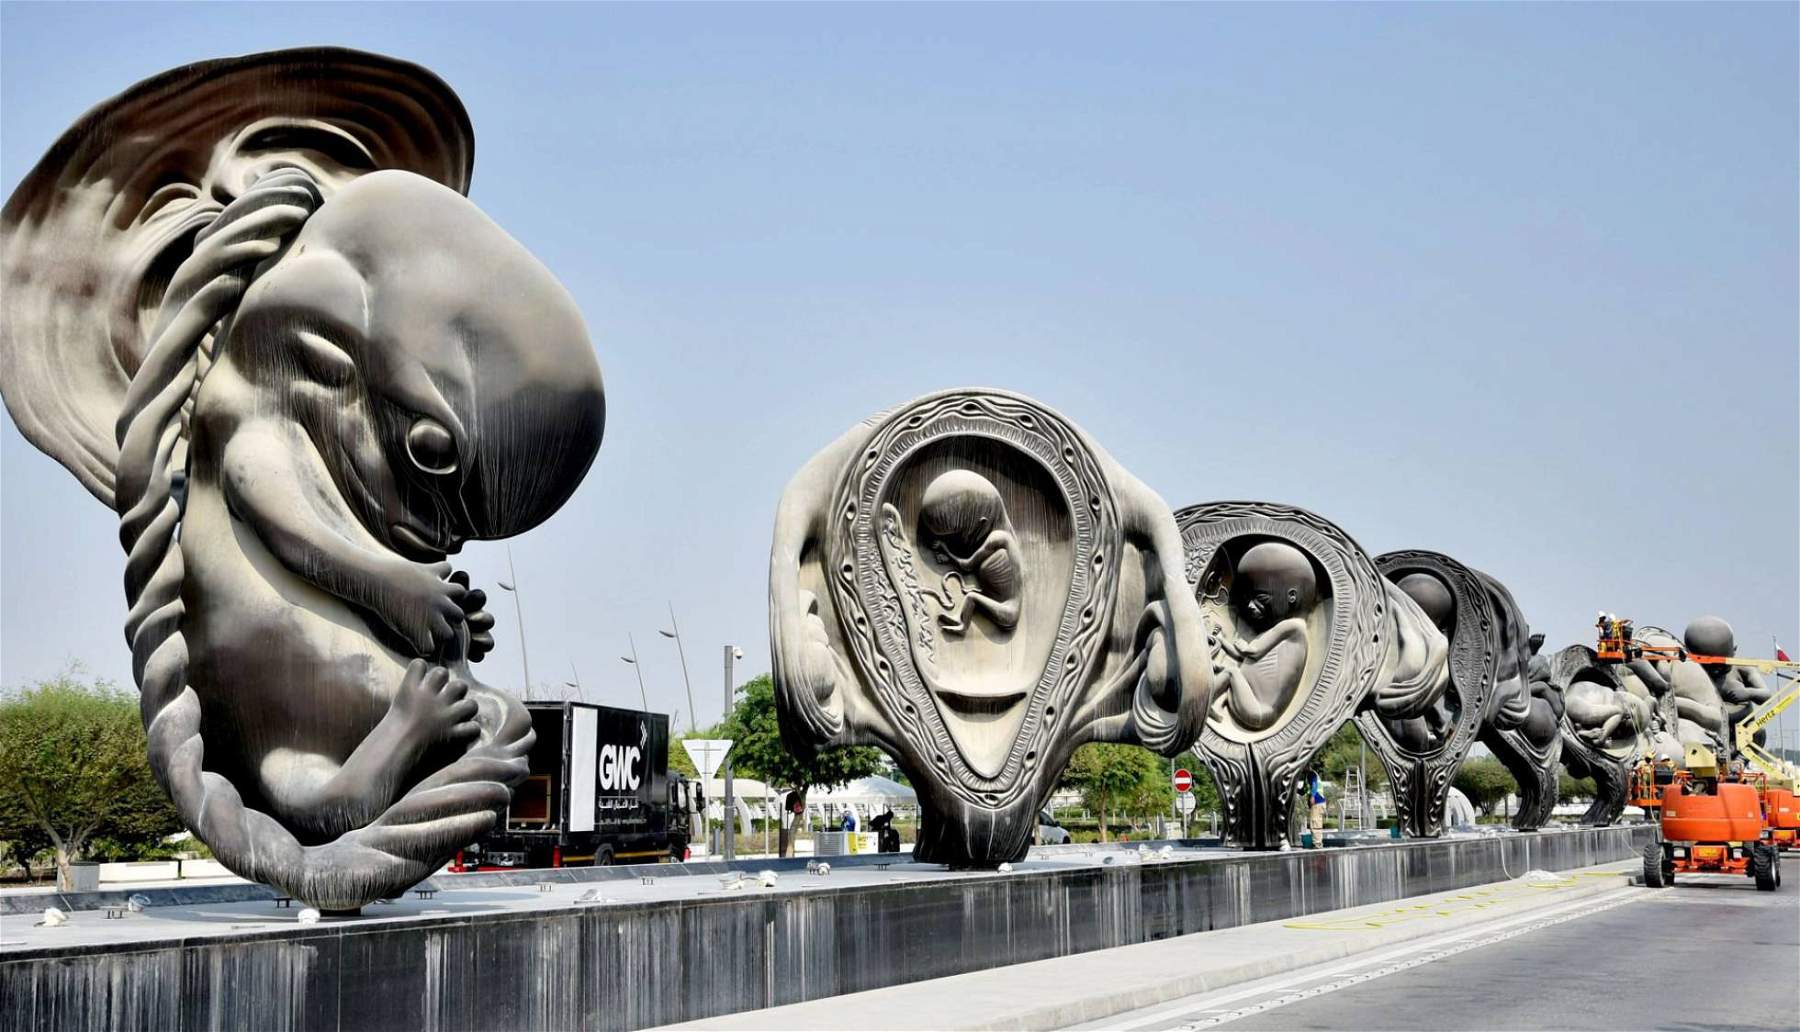 Qatar, here are Damien Hirst's giant fetuses representing the stages from conception to birth